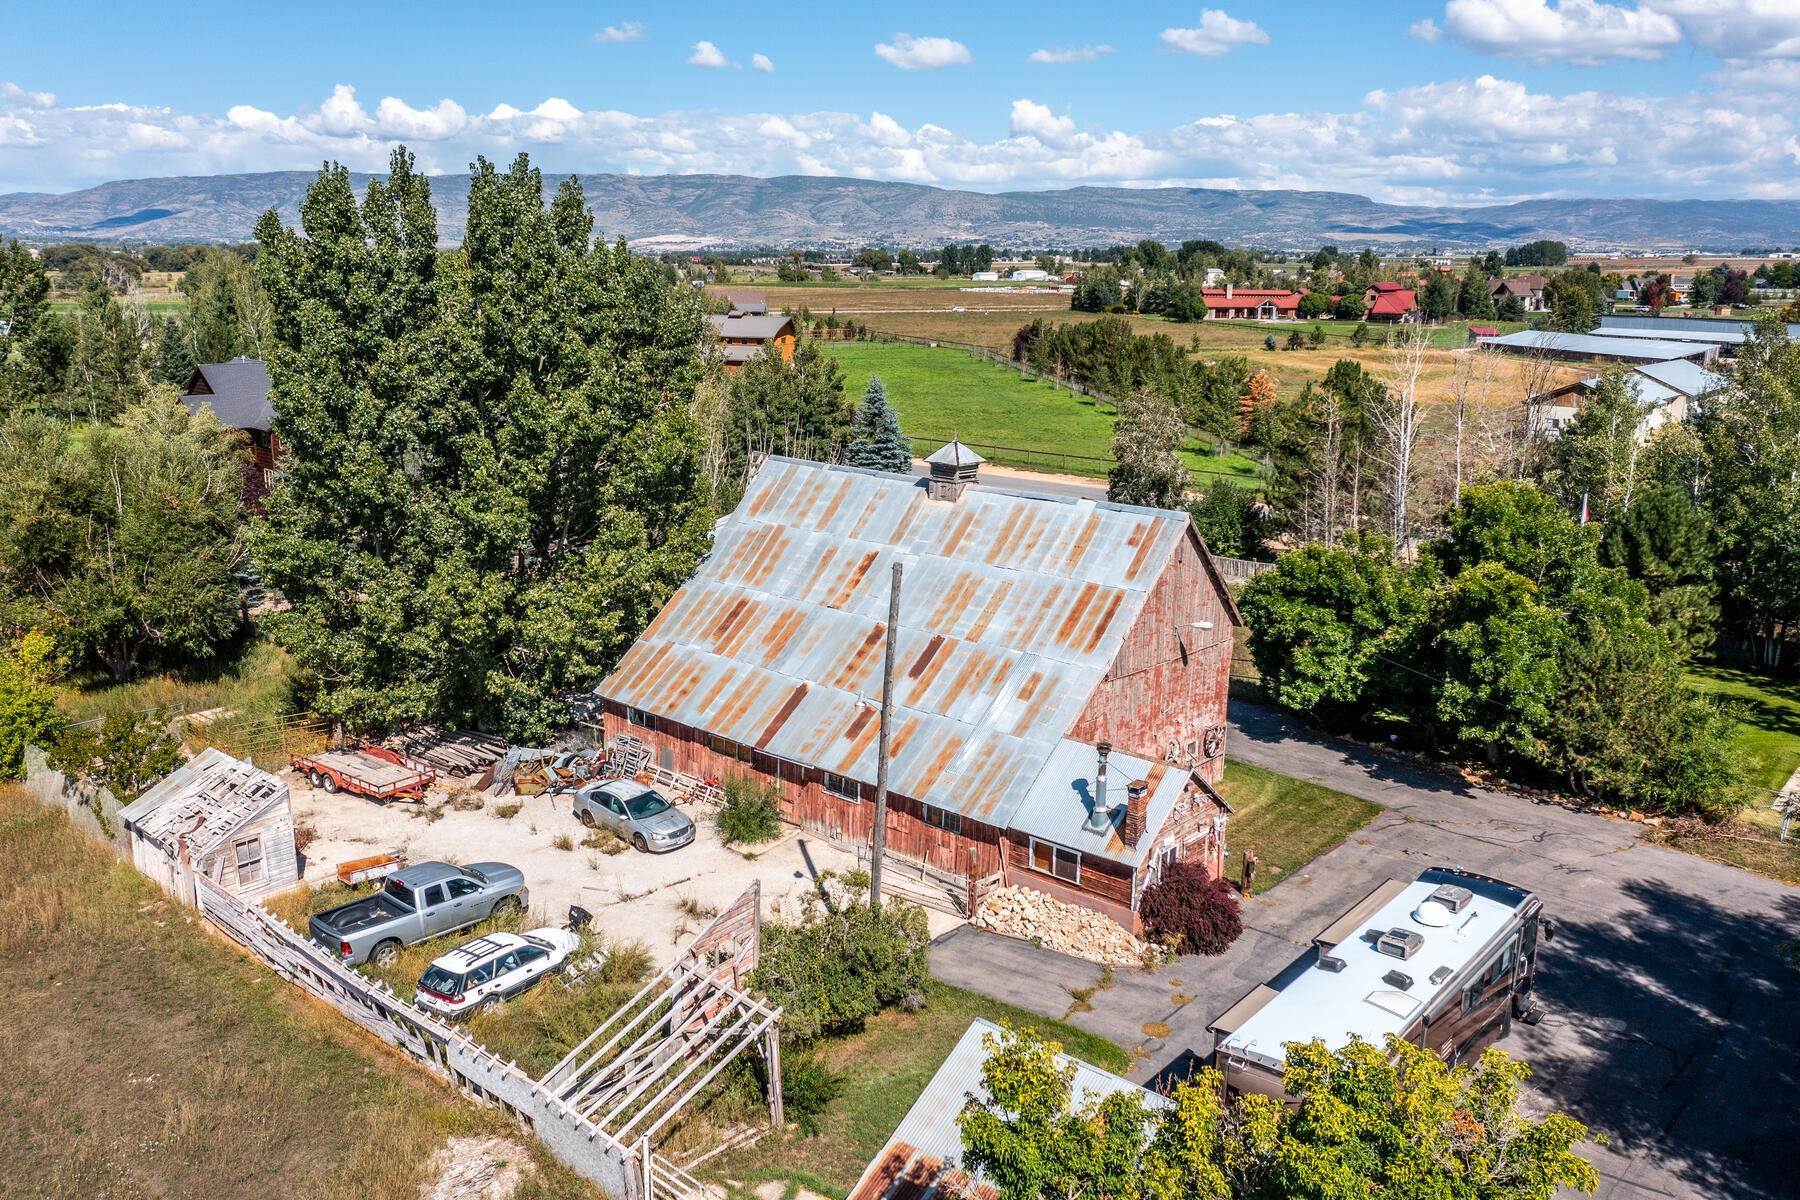 40. Farm and Ranch Properties for Sale at 3 Acres, Winterton barn, Subdividable, Limitless Potential! 3040 West 2400 South Heber City, Utah 84032 United States